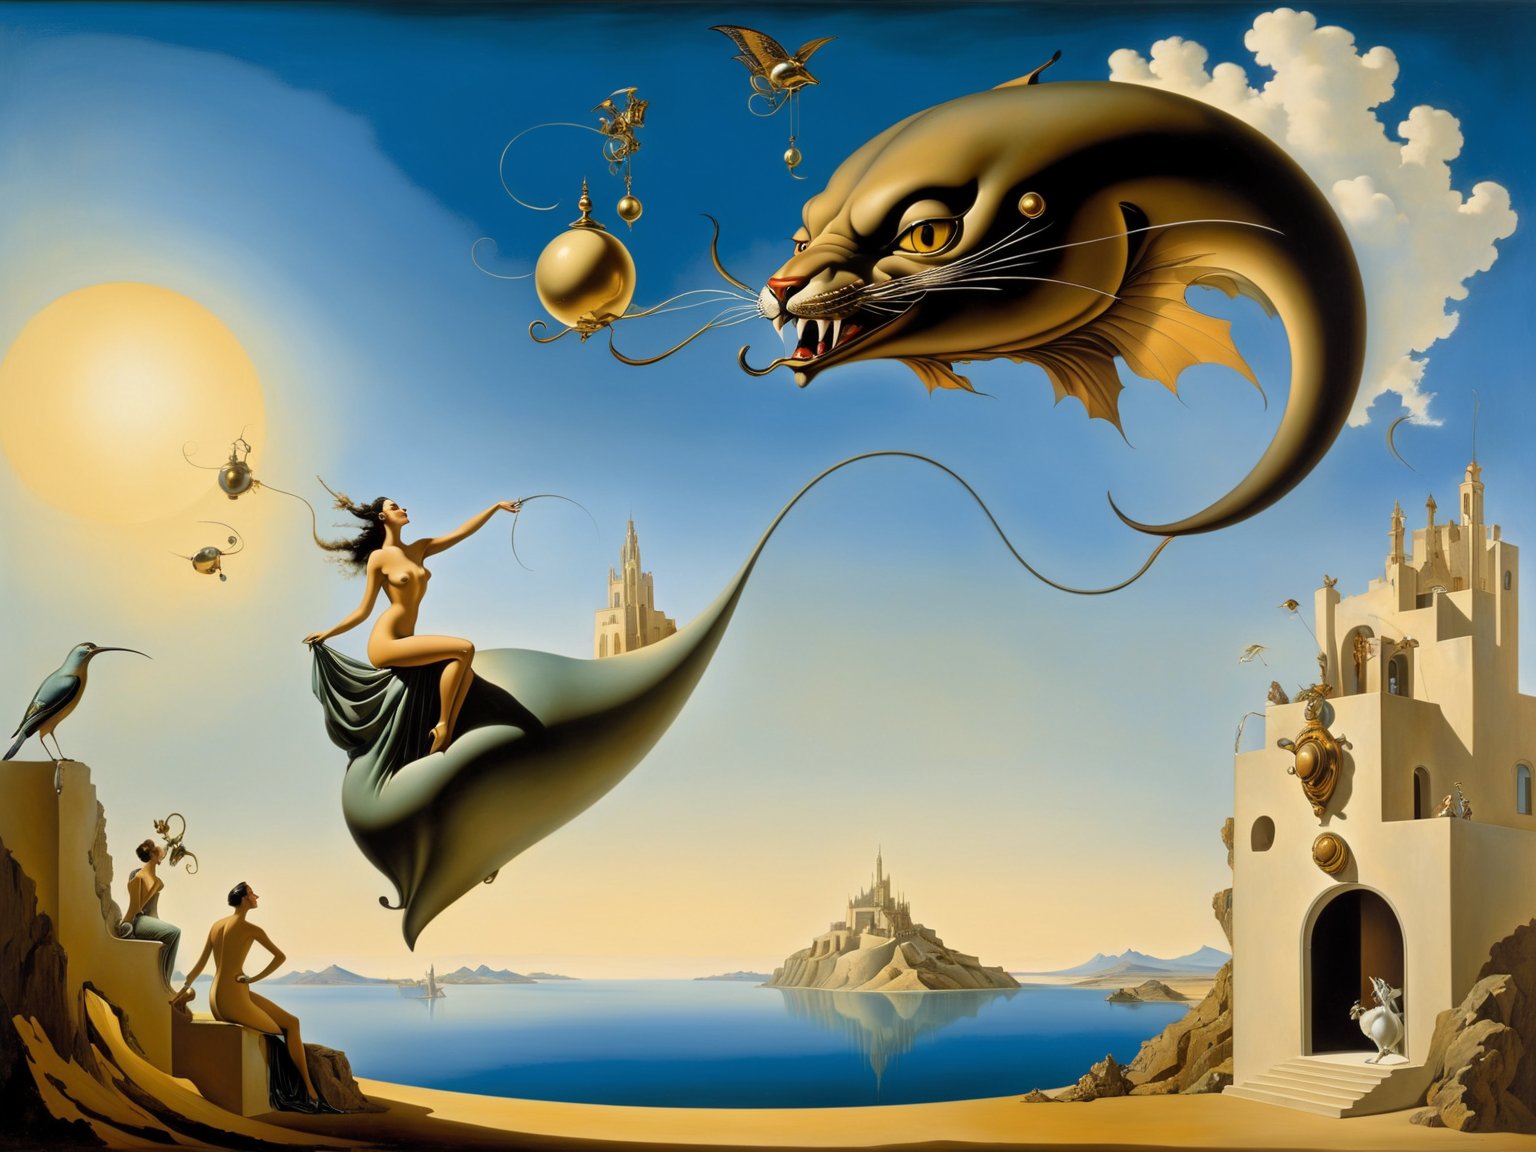 give me something crazy and make it good beast quality art , style of Salvador Dali, and Michael Parkes surreal scene, surrealism, surrealism painting, inspired by Dalí, surreal art
